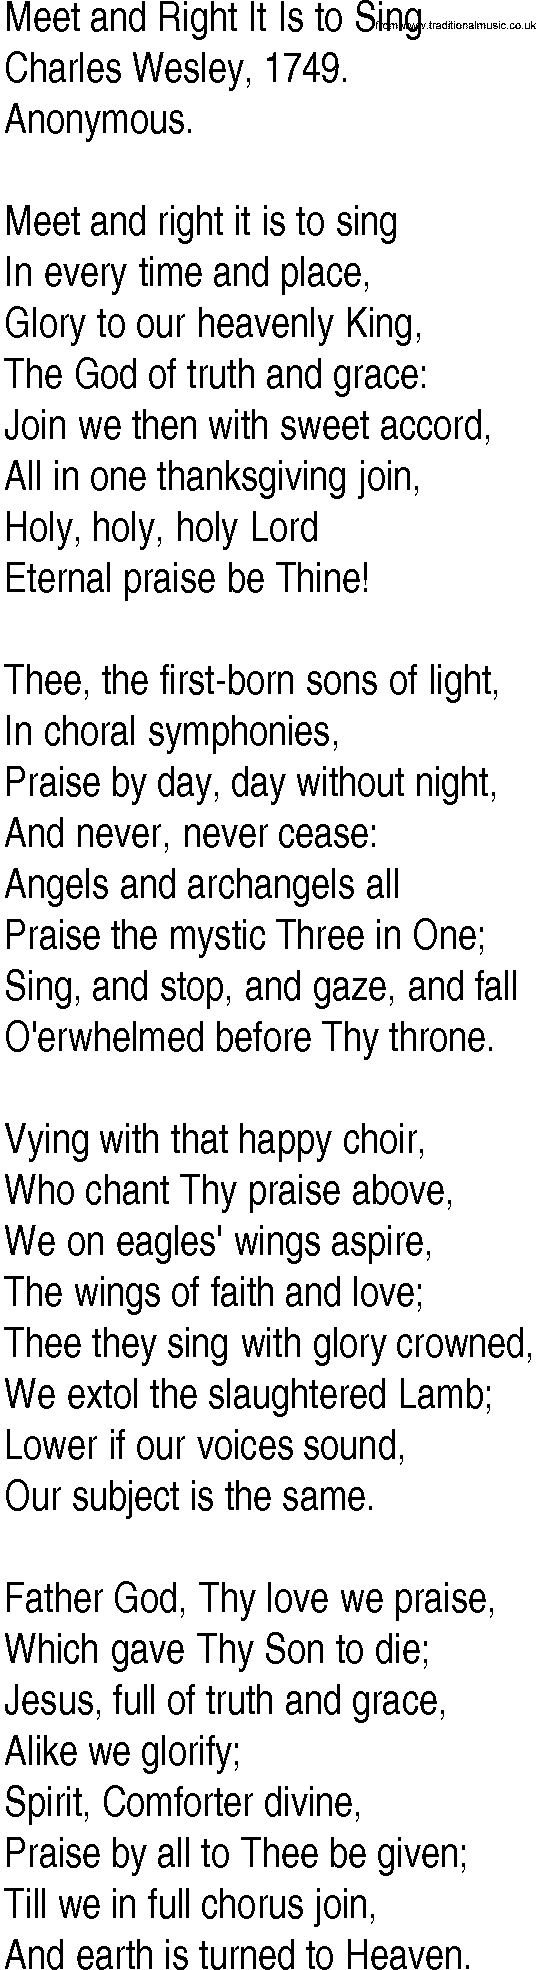 Hymn and Gospel Song: Meet and Right It Is to Sing by Charles Wesley lyrics